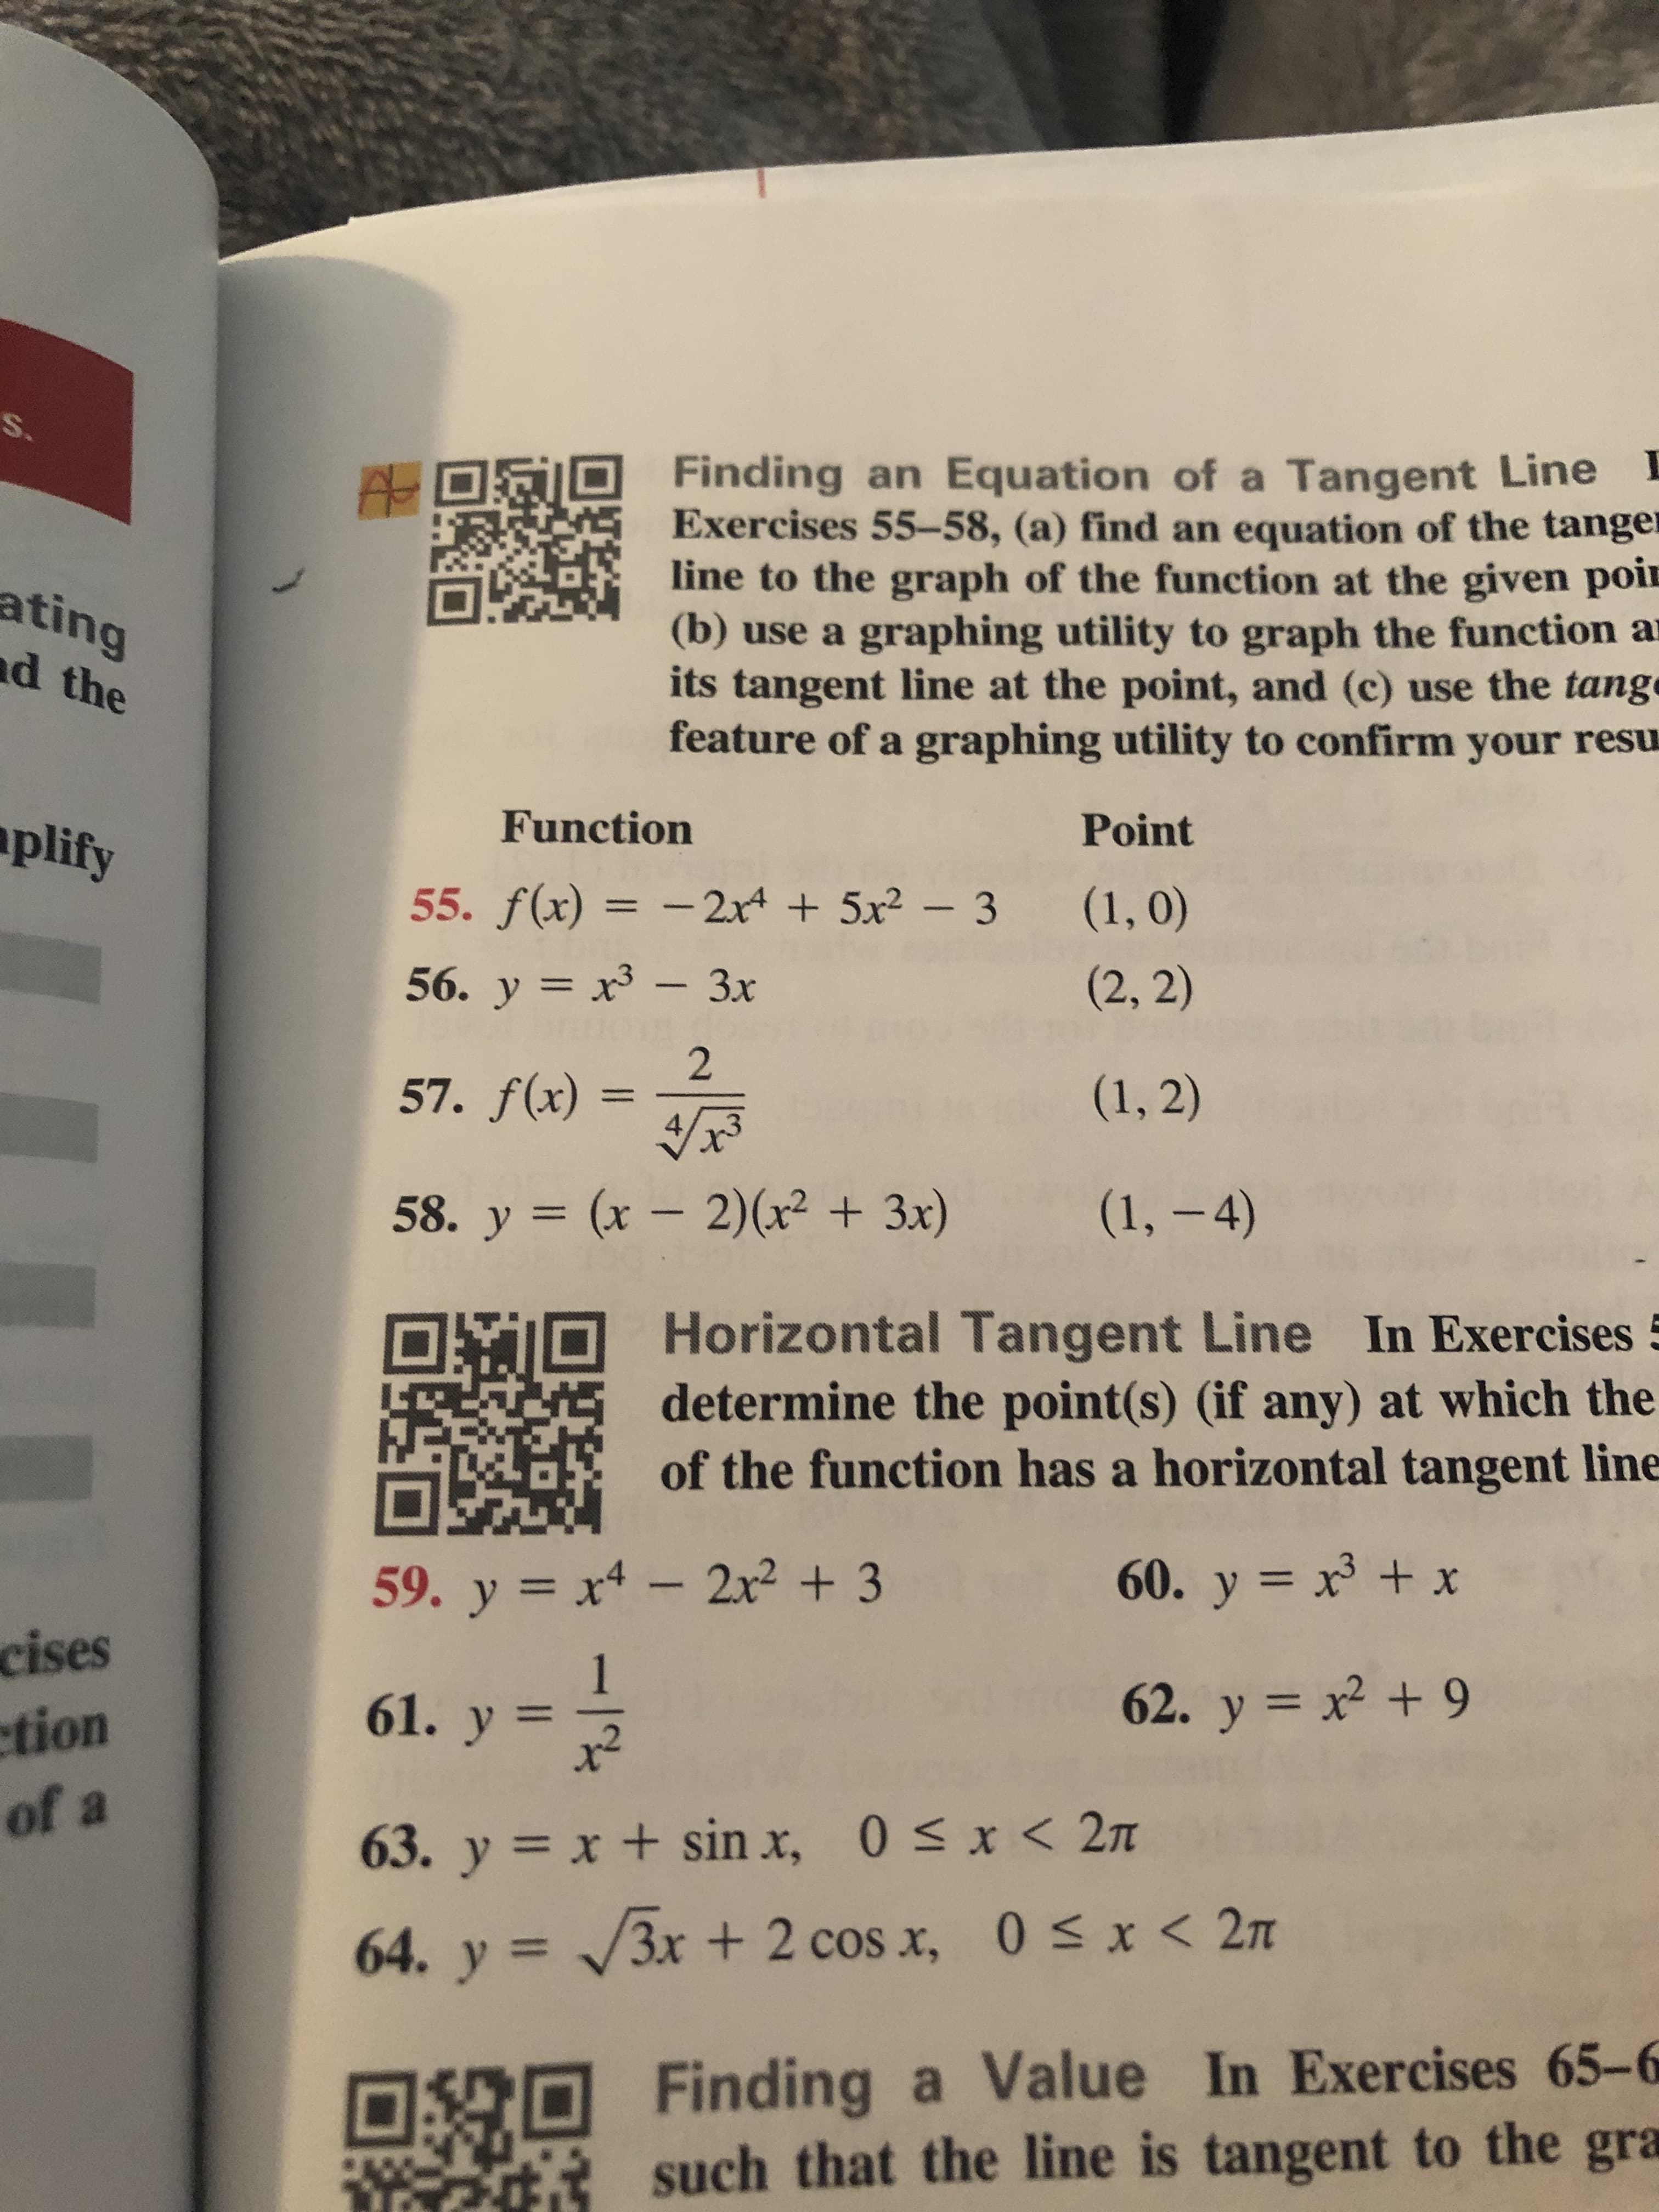 S.
Finding an Equation of a Tangent Line
Exercises 55-58, (a) find an equation of the tanger
line to the graph of the function at the given poi
(b) use a graphing utility to graph the function a
its tangent line at the point, and (c) use the tang
feature of a graphing utility to confirm your resu
ating
d the
Function
aplify
Point
55. f(x) =2x4 5x-3 (1, 0)
(2, 2)
56. y x3- 3x
2
57. f(x)
(1, 2)
(1, -4)
58. y (x - 2) (x2 3x)
Horizontal Tangent Line In Exercises
determine the point(s) (if any) at which the
of the function has a horizontal tangent line
60. y x x
59. y x4-2x2 3
Heg
cises
ction
of a
62. y x2 +9
61. y =
63. y x+ sin x, 0 x< 27T
64. y 3x + 2 cos x, 0 x < 2
Finding a Value In Exercises 65-6
such that the line is tangent to the gra
-%
